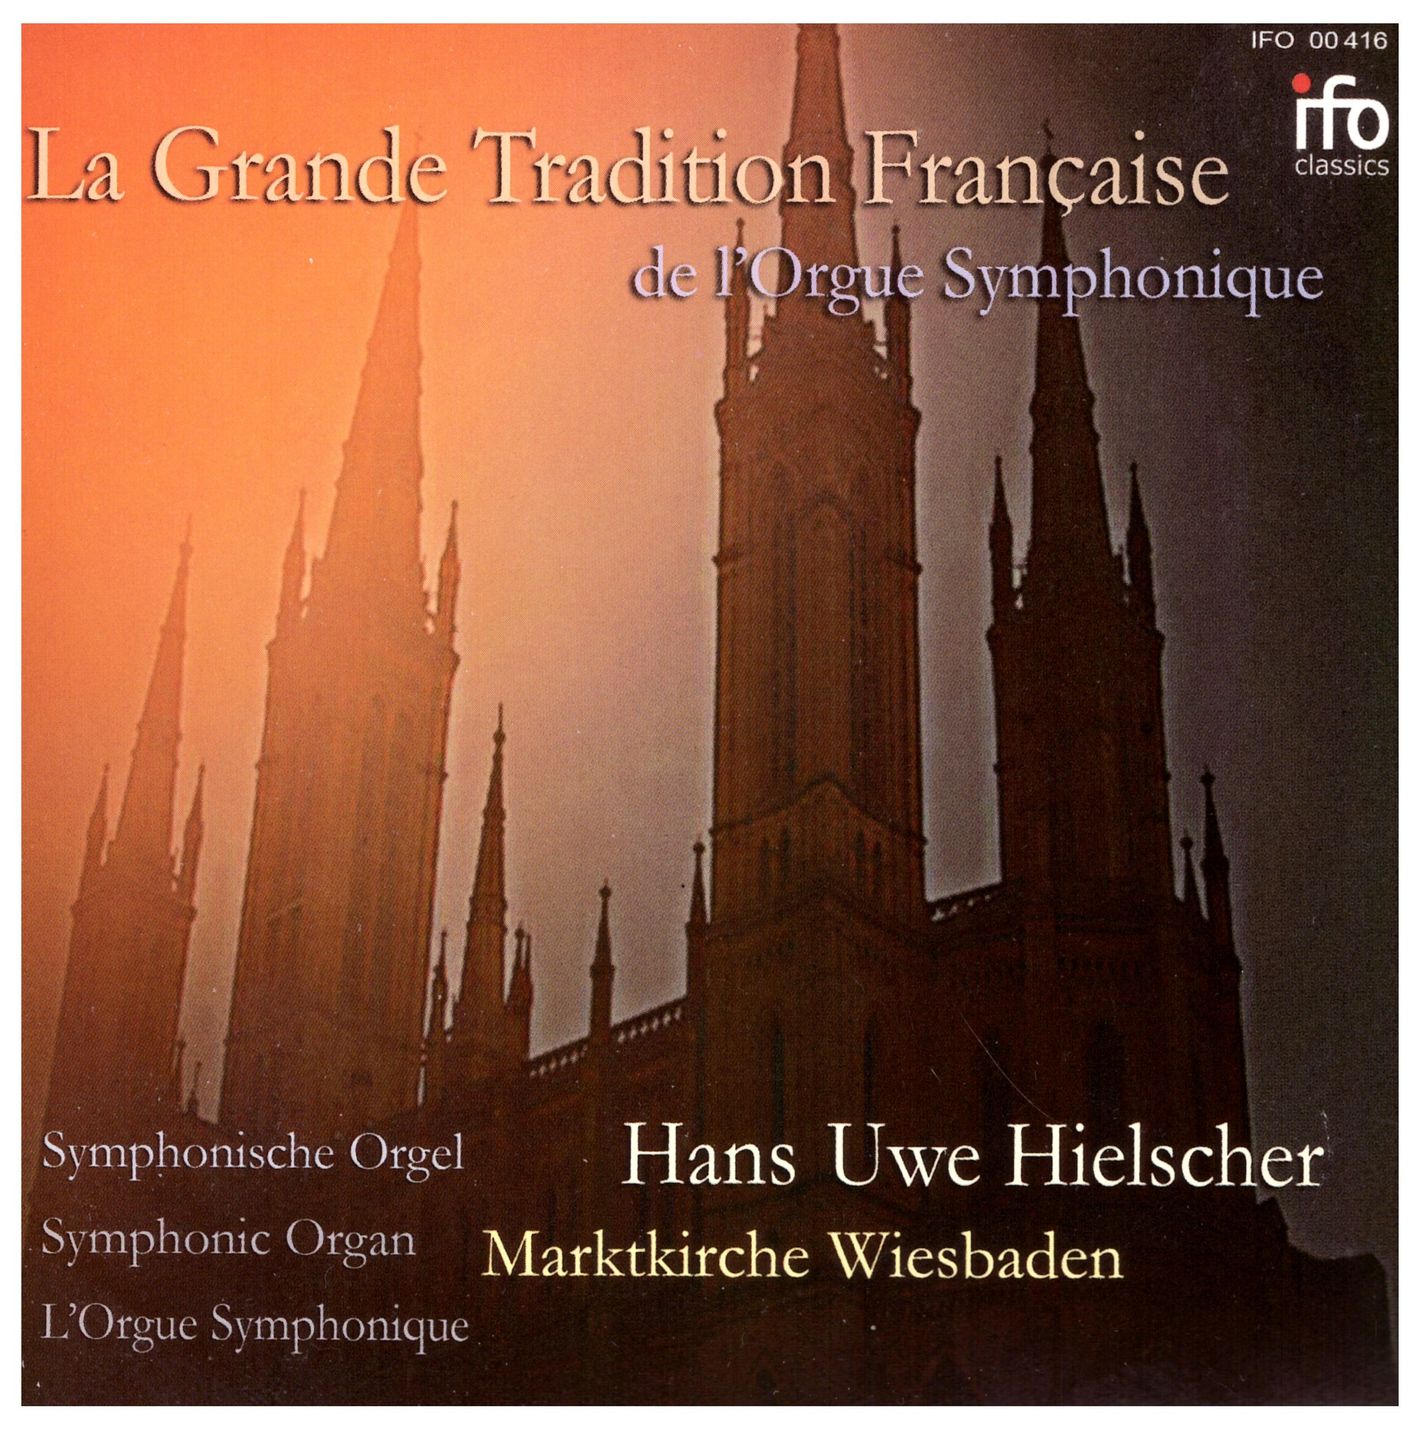 The Great Tradition of<br>French Symphonic Organ Music